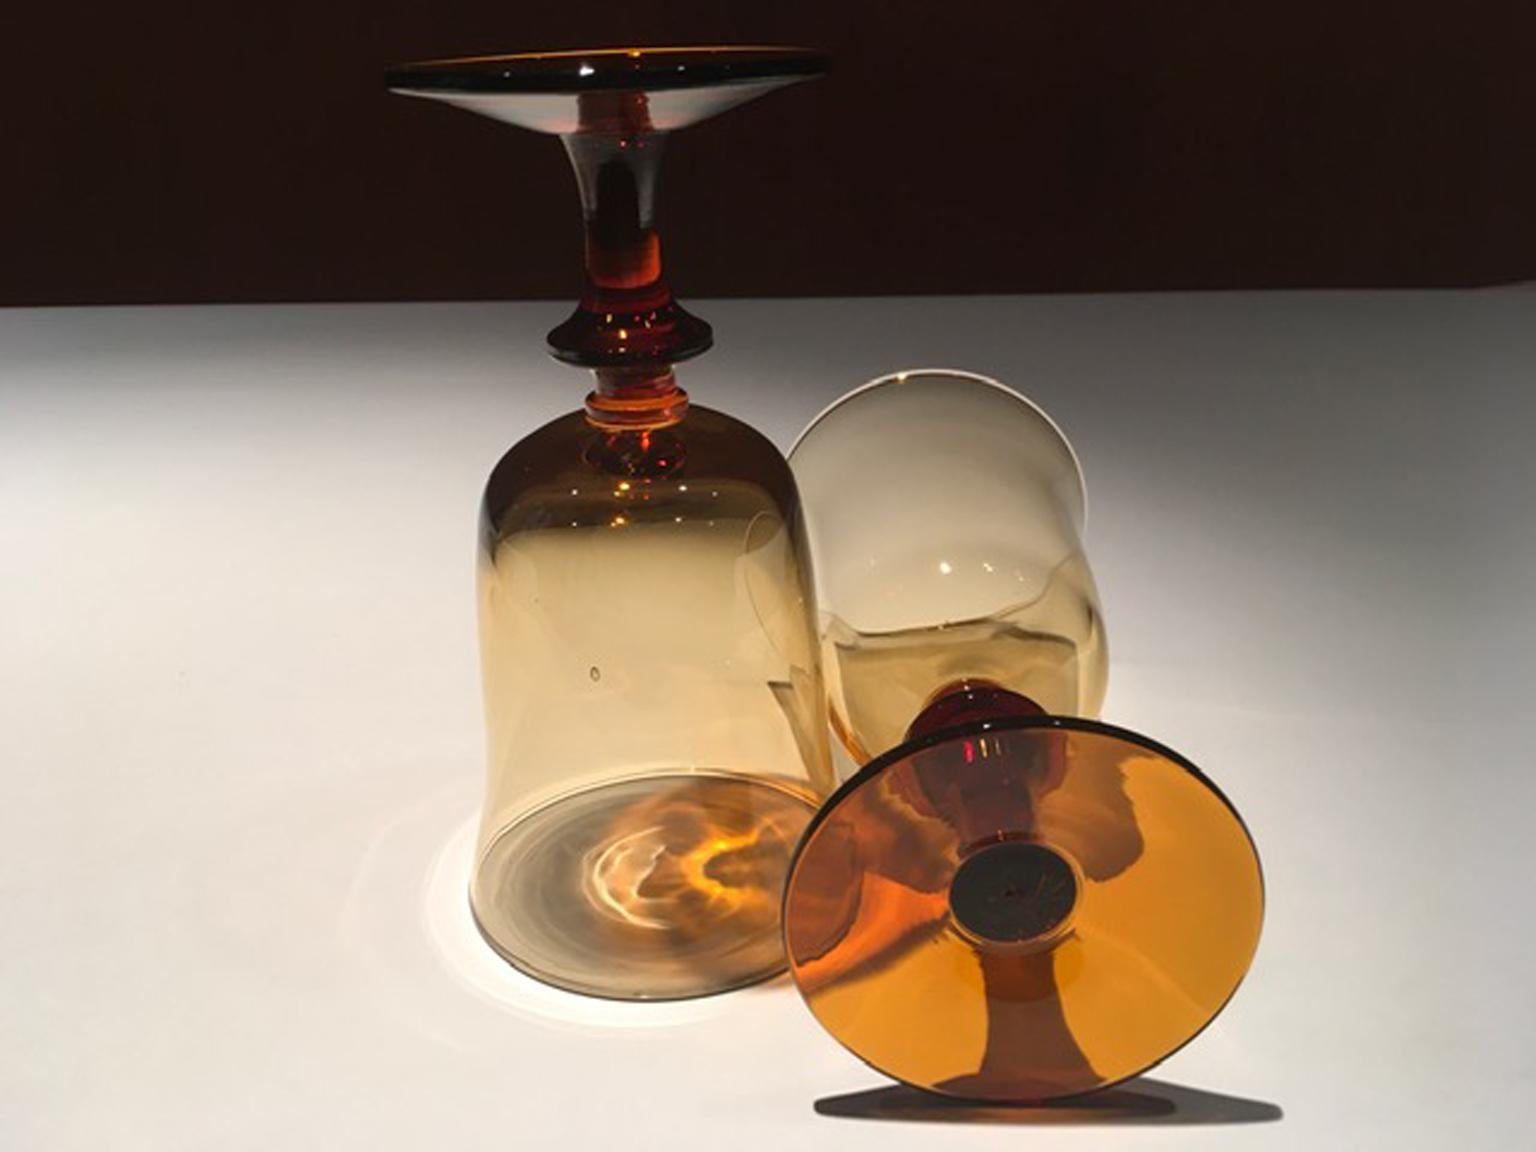 This pair of French blown glass gobelets are elegant to arrange an Holiday table dining.
The amber glass has an intense and vivid color.
Perfect to refresh a traditional dining set dishes, placing in contrast for color or style.